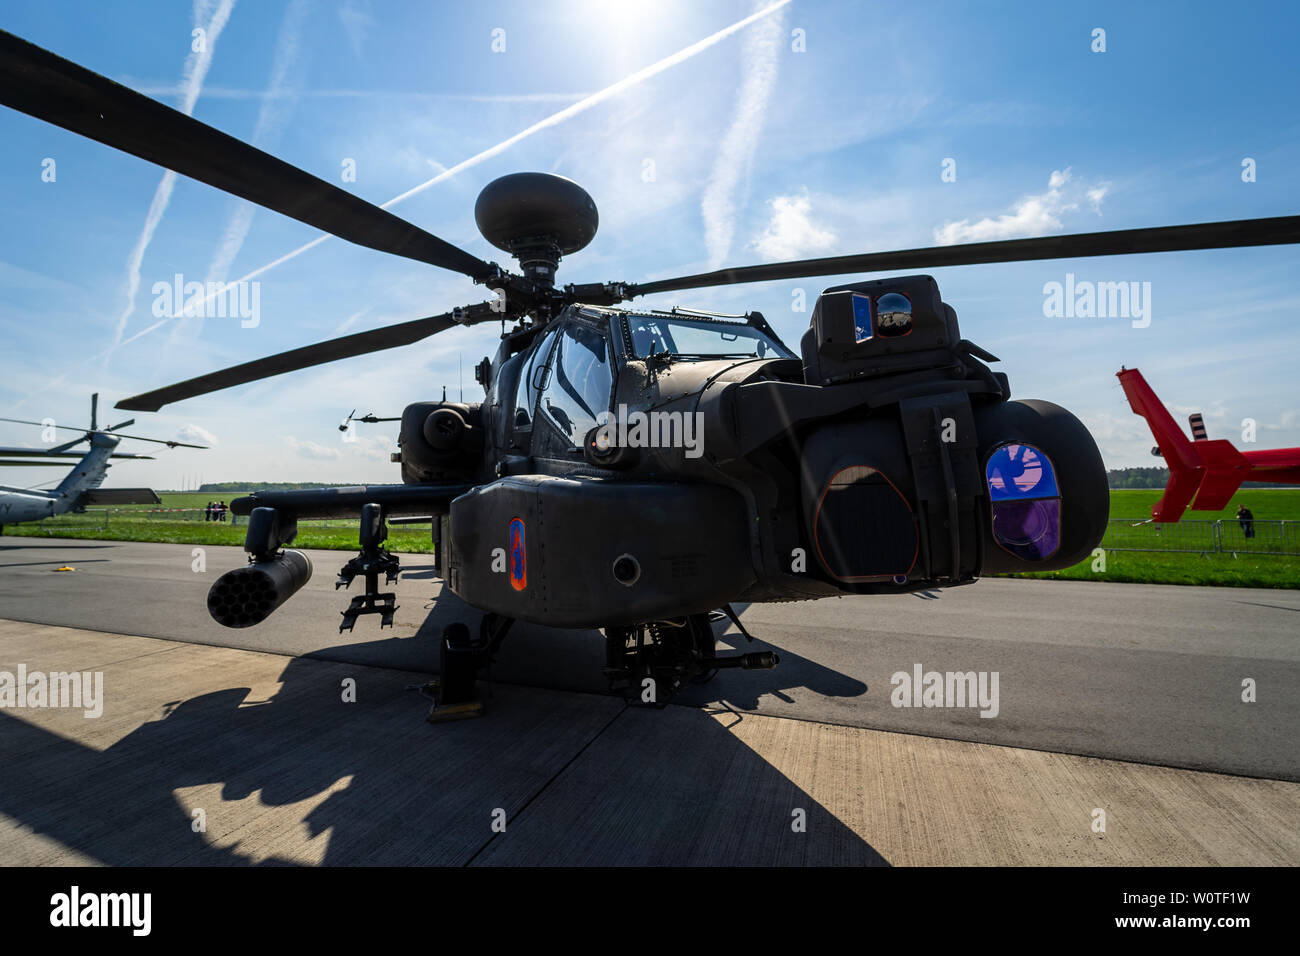 BERLIN, GERMANY - APRIL 27, 2018: Attack helicopter Boeing AH-64D Apache Longbow. US Army. Exhibition ILA Berlin Air Show 2018 Stock Photo